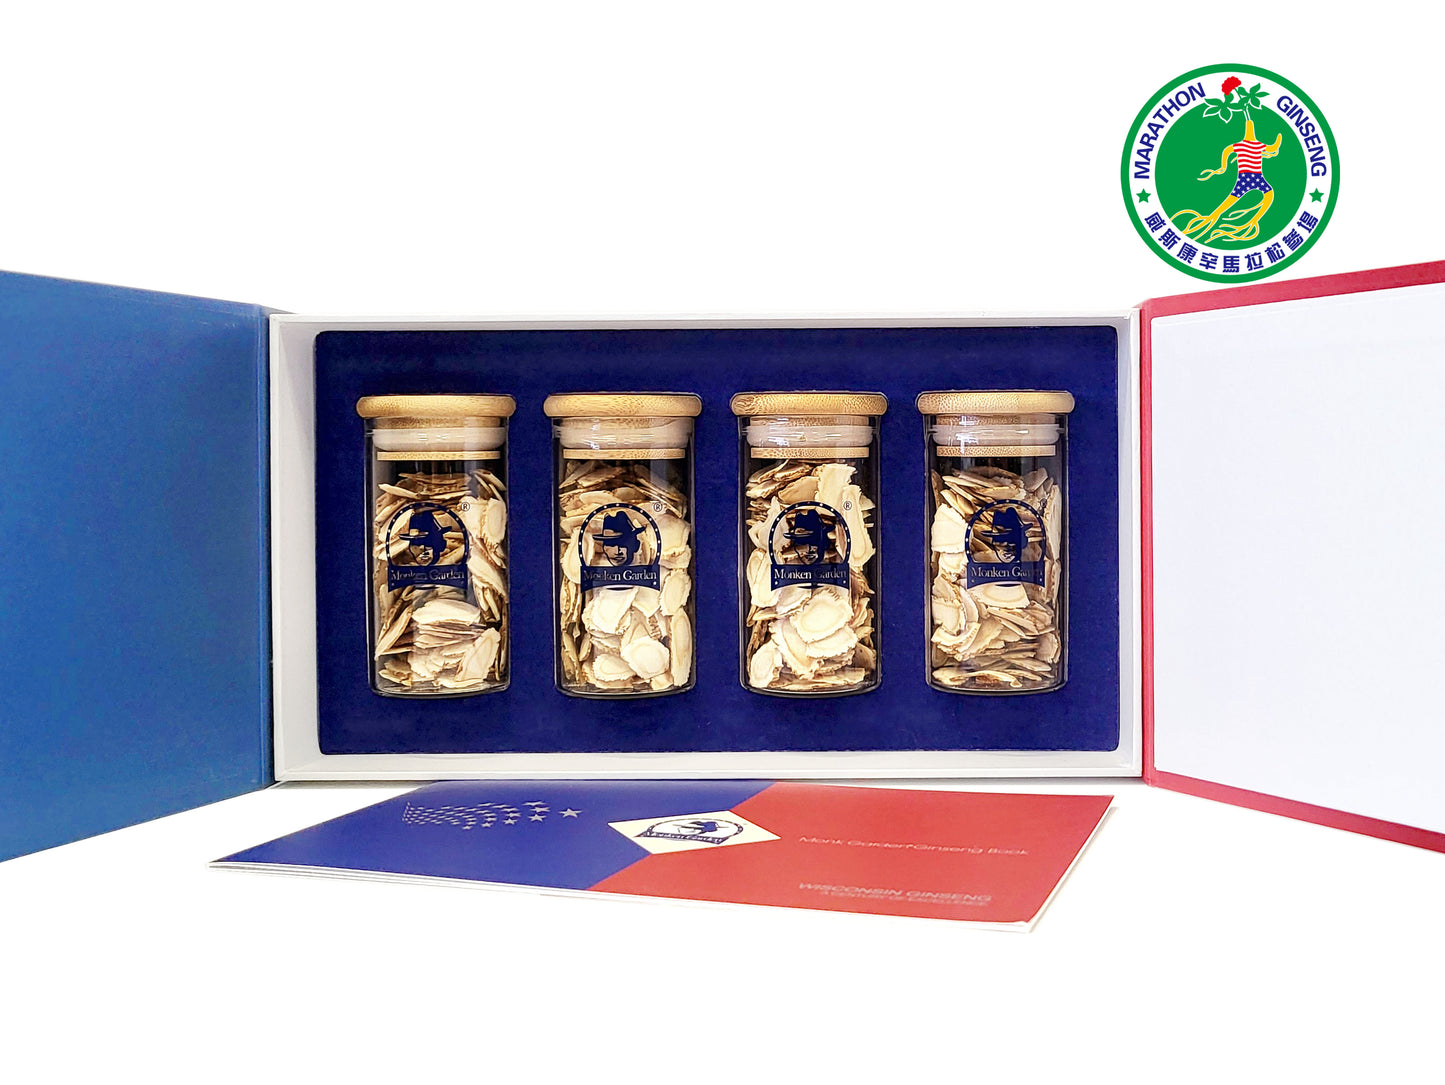 M918CN - Monk Garden Cultivated Premium Ginseng Slices - Delivery in China